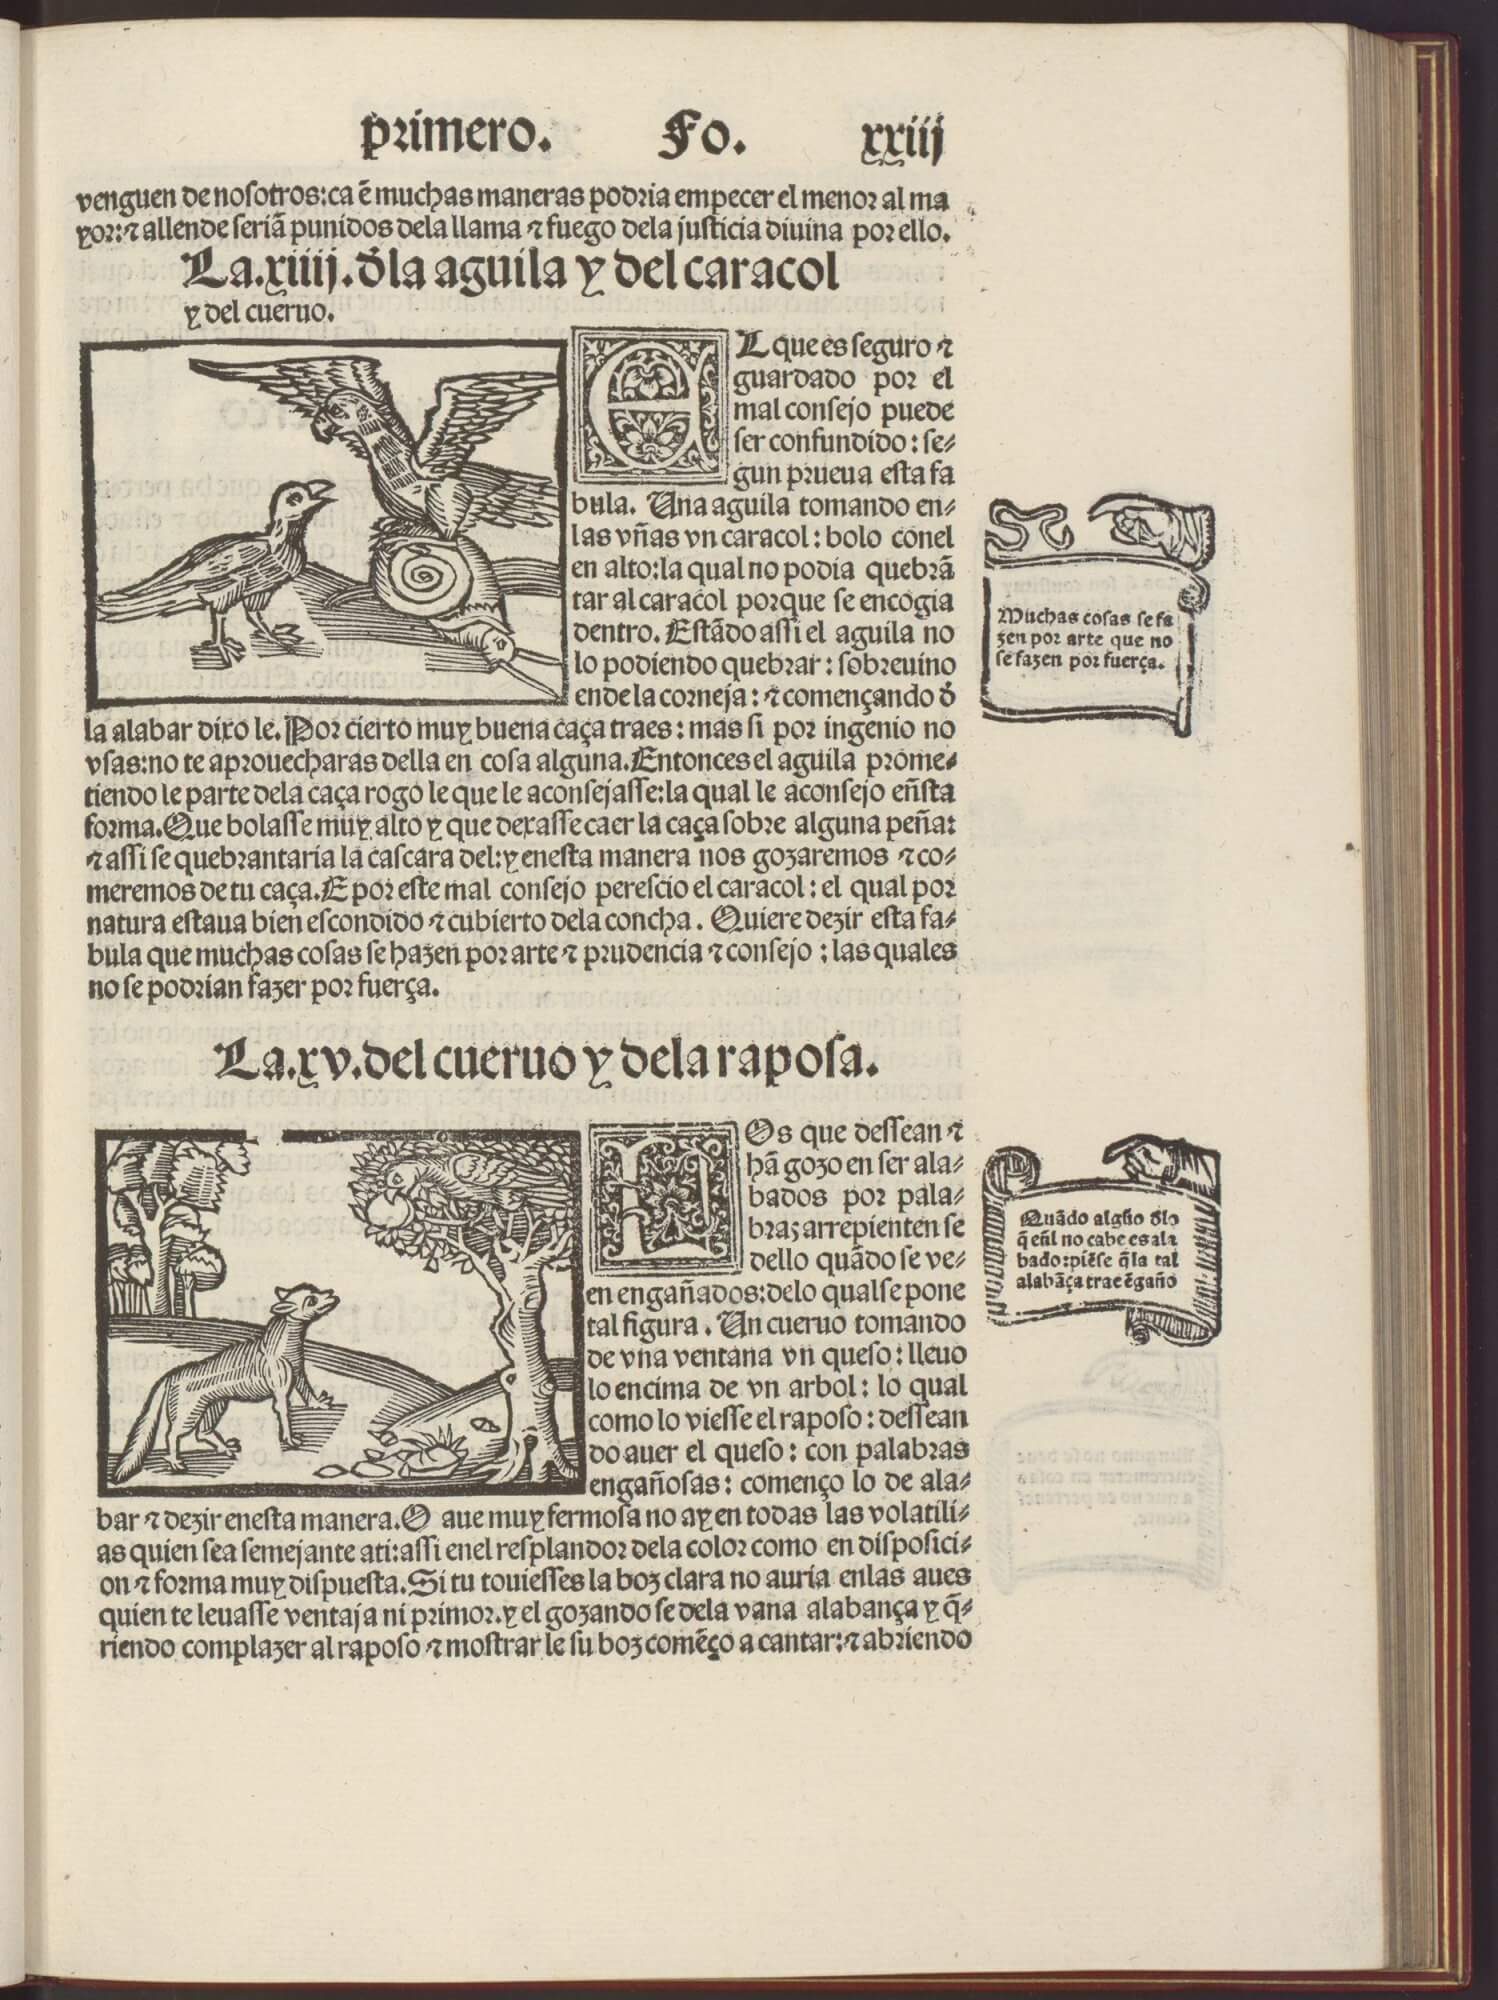 A unique feature of this text is how the morals are isolated in the margins next to their respective fables. The use of the manicules and banners serves to emphasize the lofty values they impart.